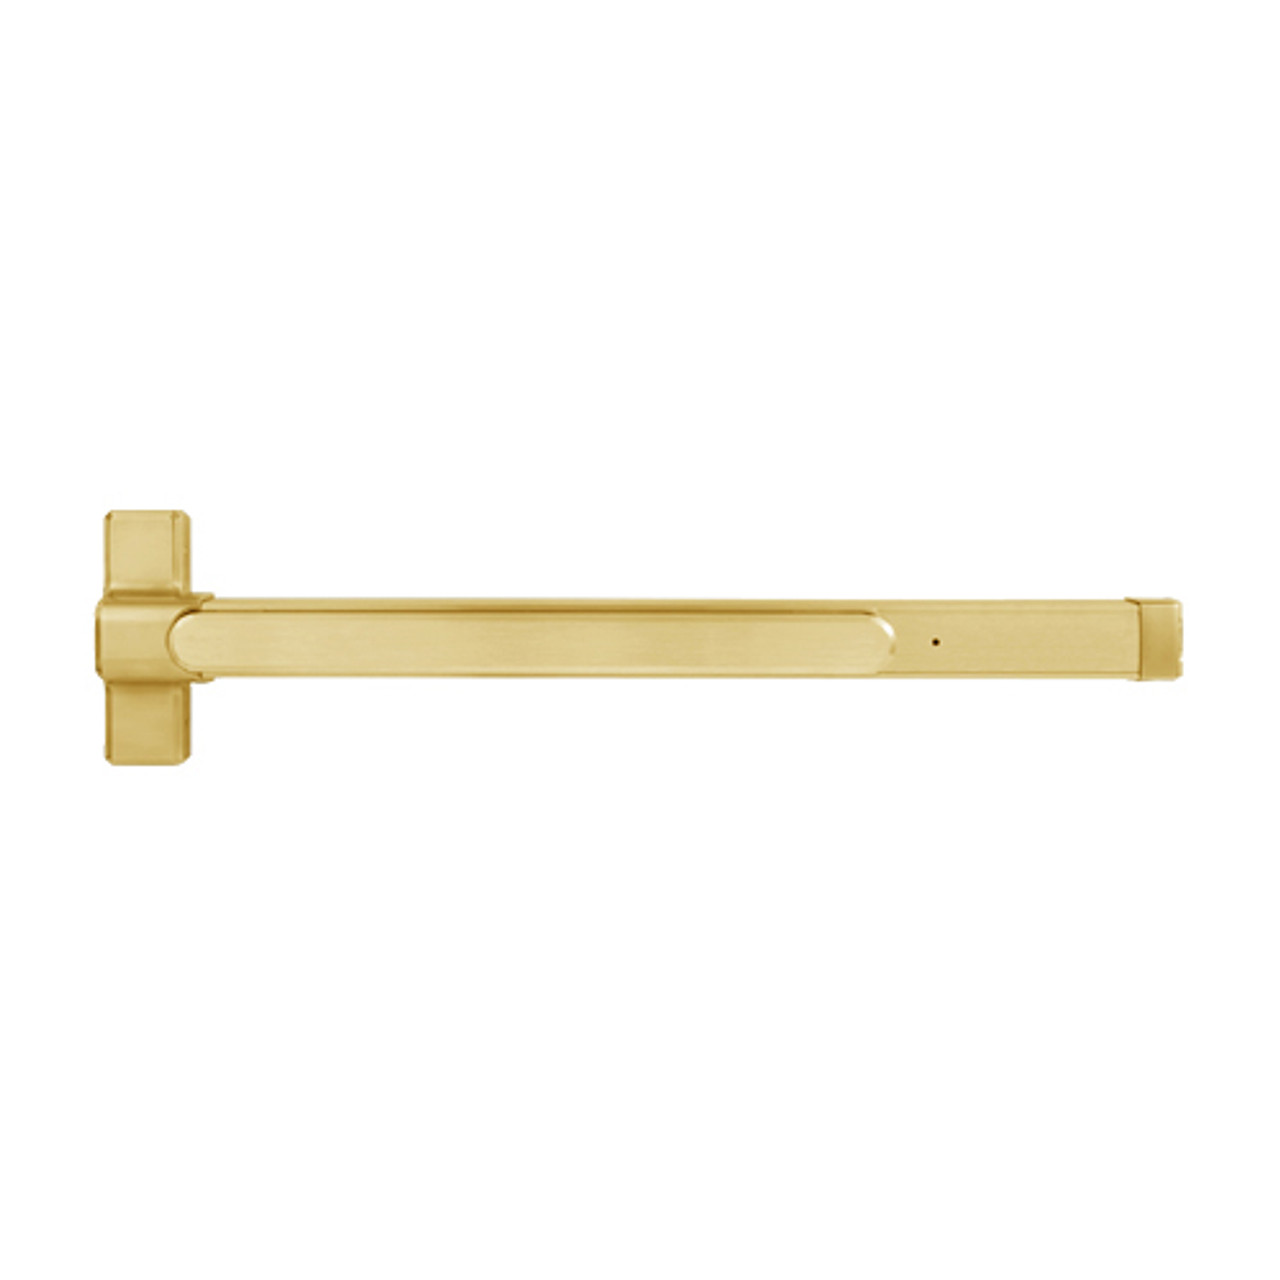 QED129LRX-48-8-605 Stanley QED100 Series Heavy Duty Concealed Vertical Rod Fire Rated Exit Device in Bright Brass Finish